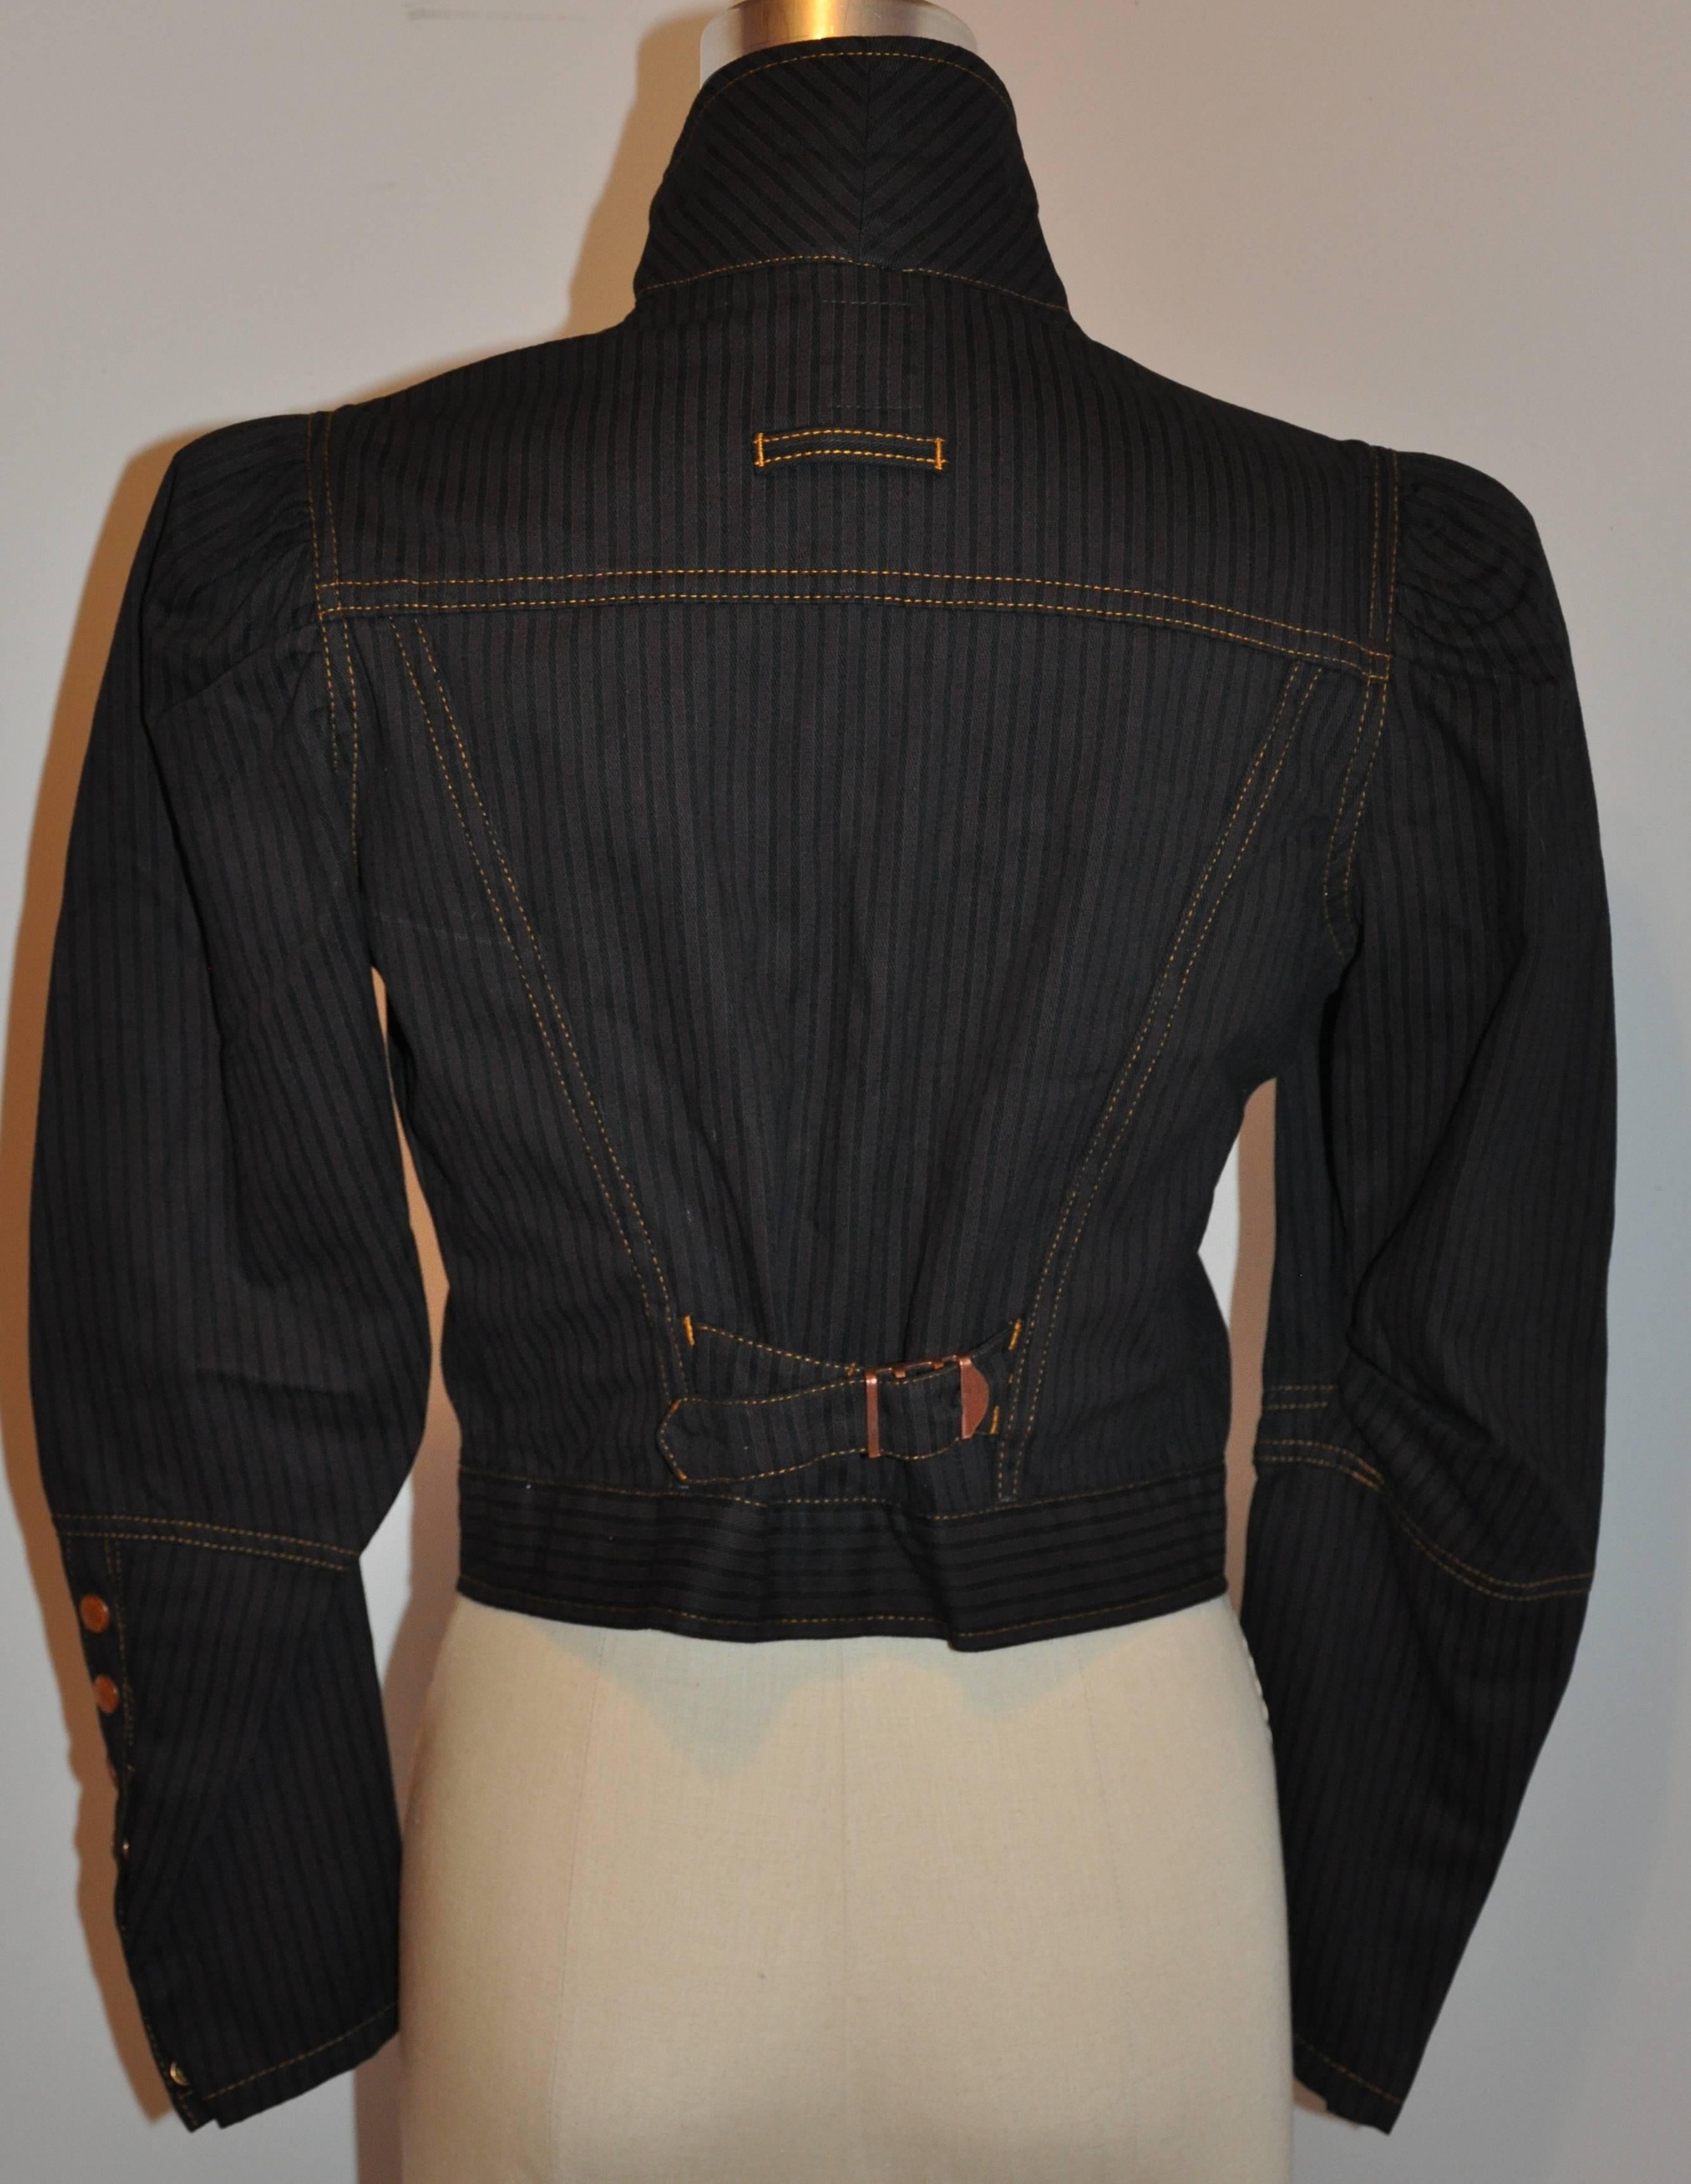        Jean Paul Gaultier cropped jacket is accented with detailed tapered sleeves accented with snaps at the cuffs and puffed shoulders. The center back has adjustable pulls to tighten if desire. There are two patch breast pockets with snap flaps.